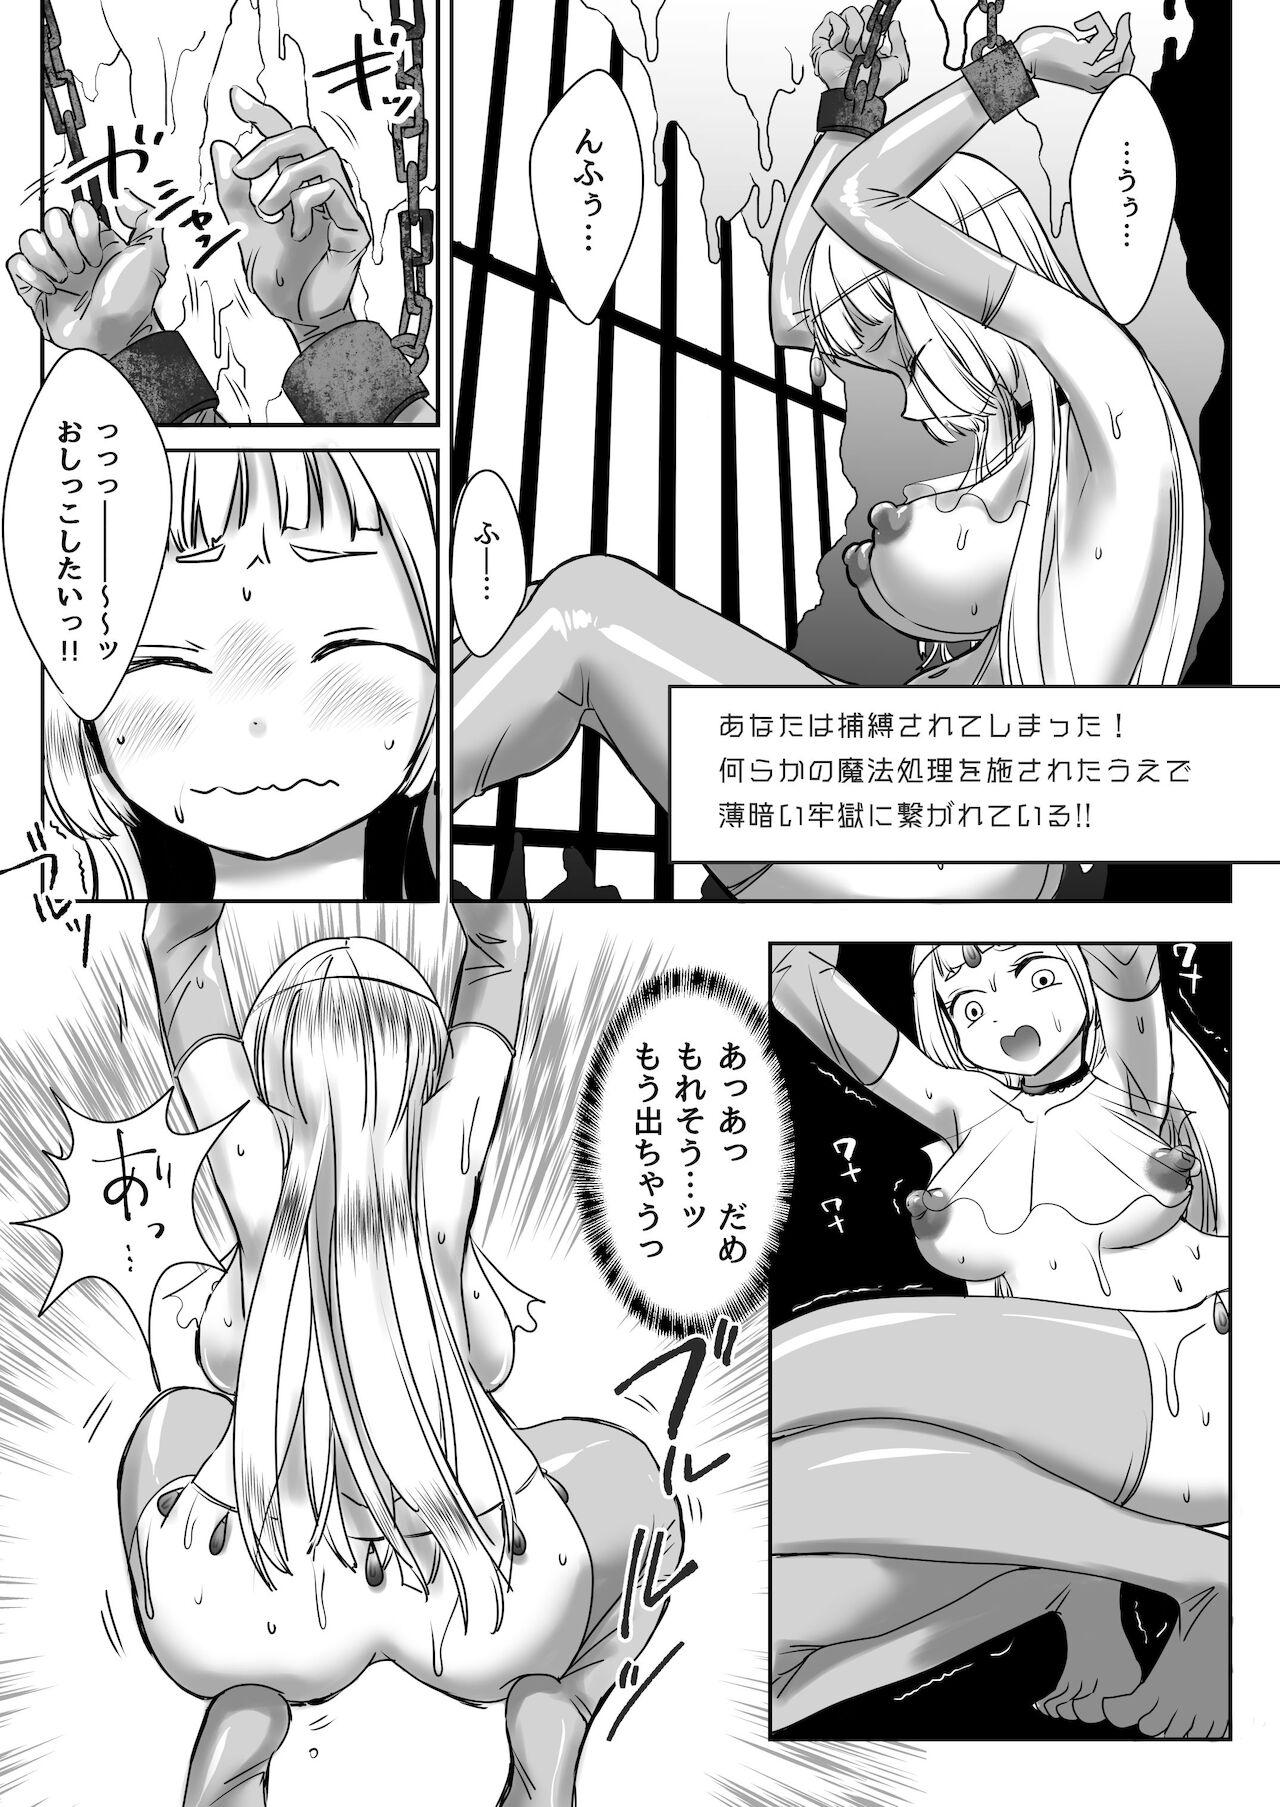 Moan C99 VR Doujin Eroge Reminiscence Room - Original Perfect Butt - Page 10